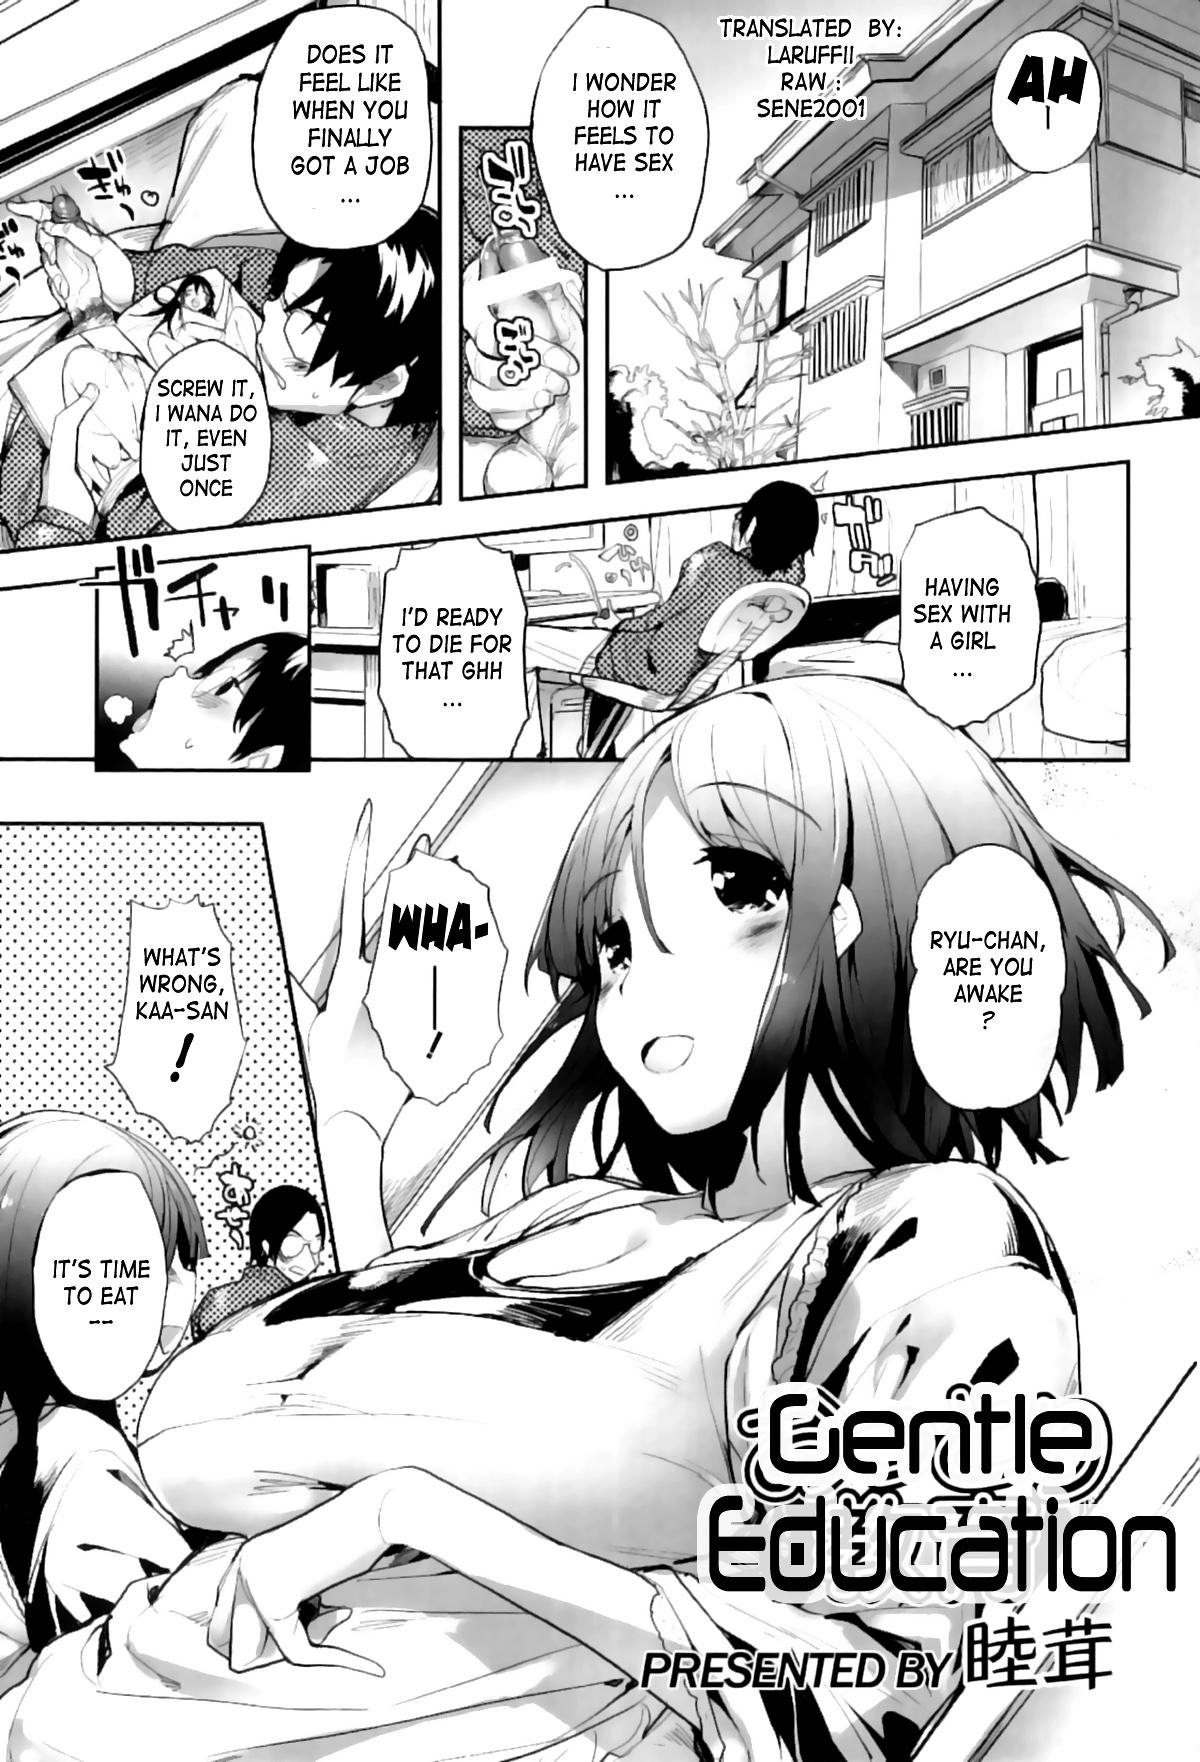 Teenie Anthology - Maman Love 06 - Boshi Soukan Anthology Chapter 01 part1 [English] Delicia - Page 4